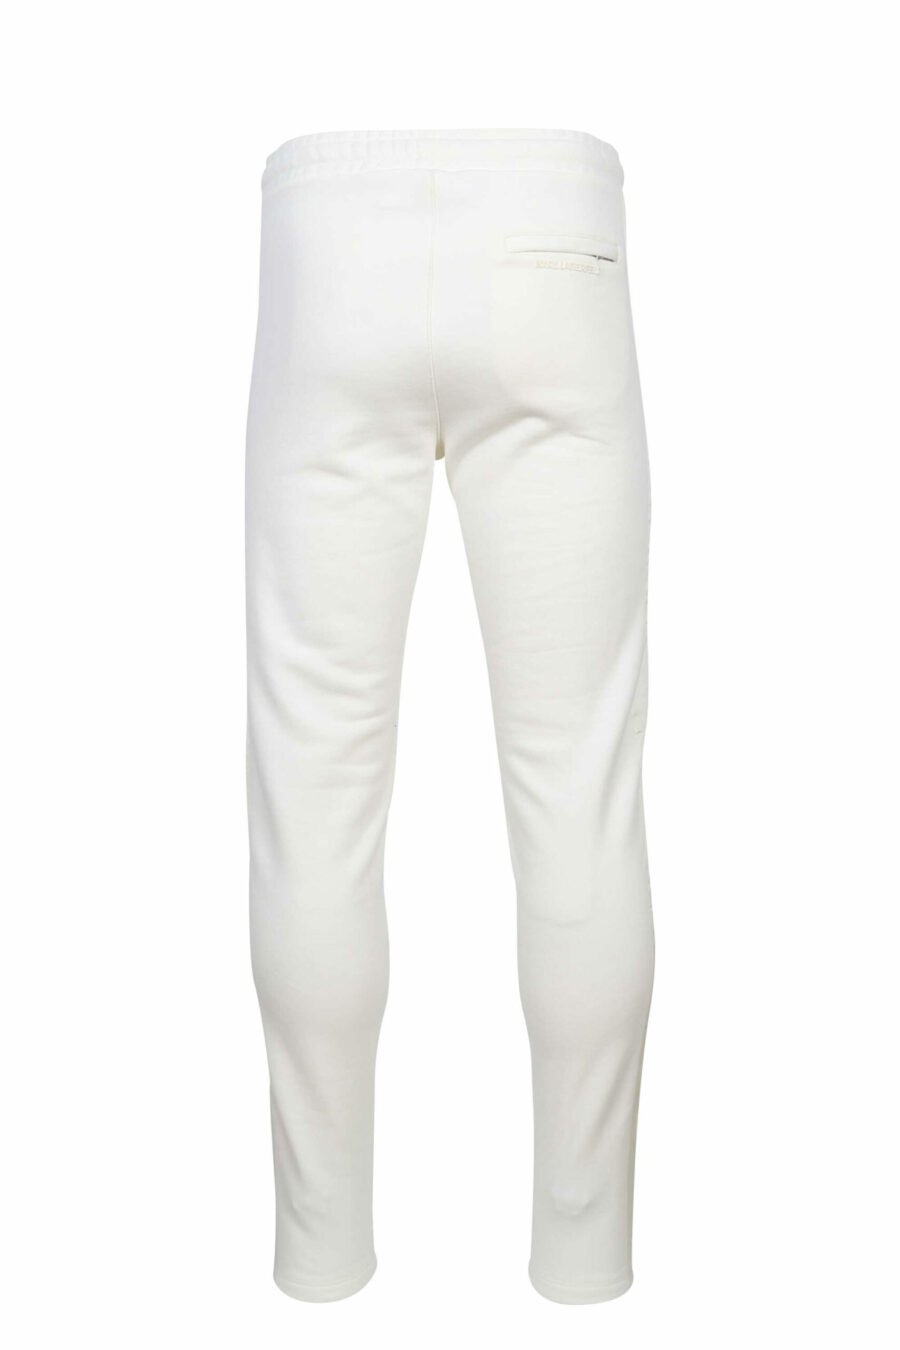 Tracksuit bottoms beige - 4062226650526 2 1 scaled